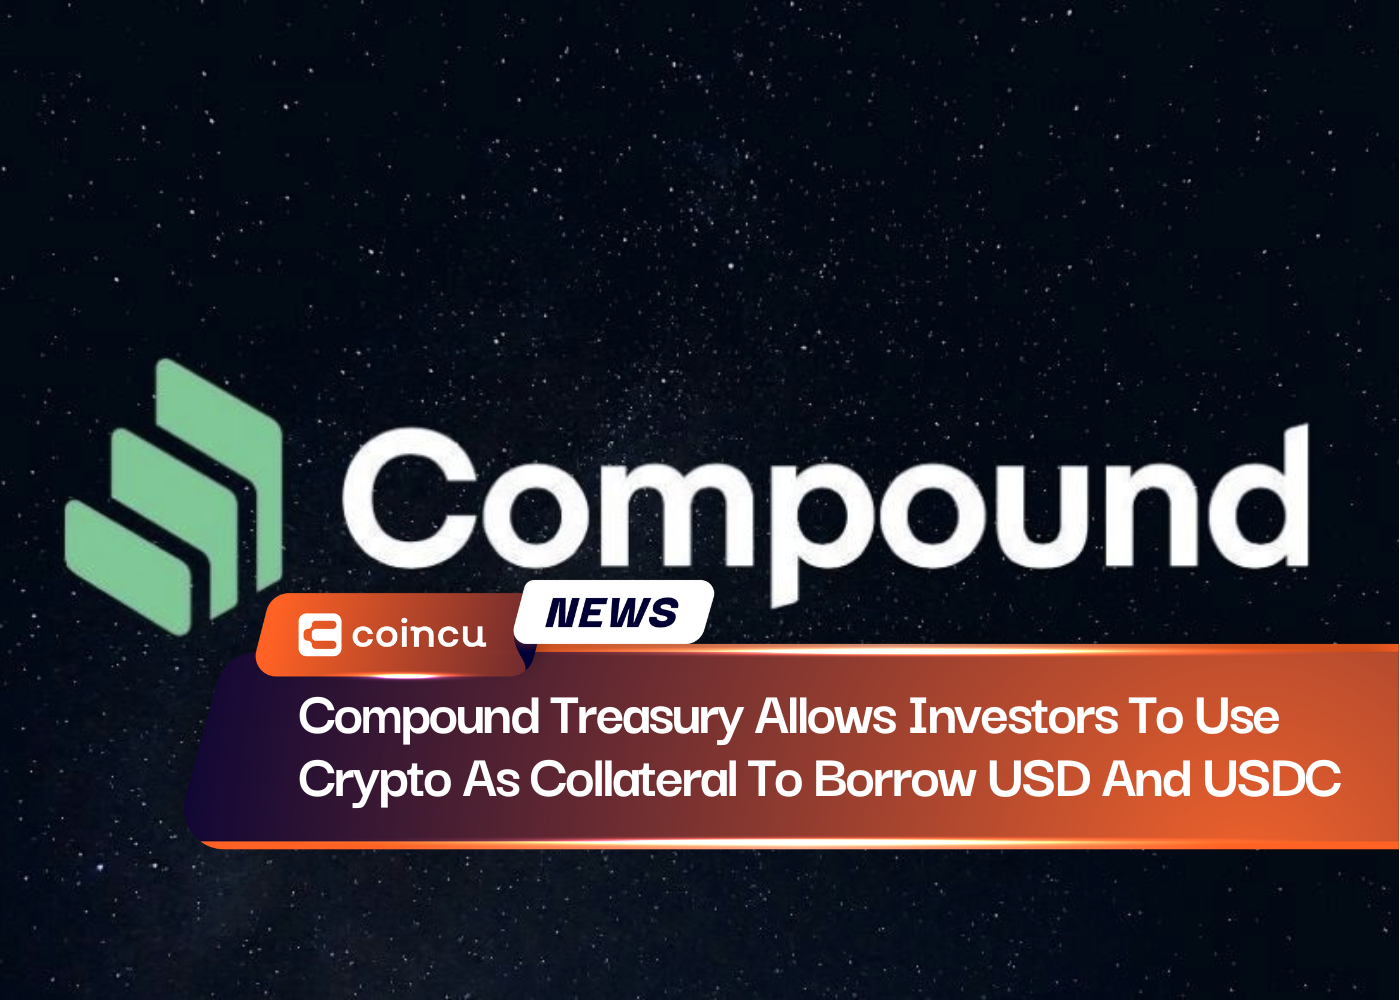 Compound Treasury Allows Investors To Use Crypto As Collateral To Borrow USD And USDC